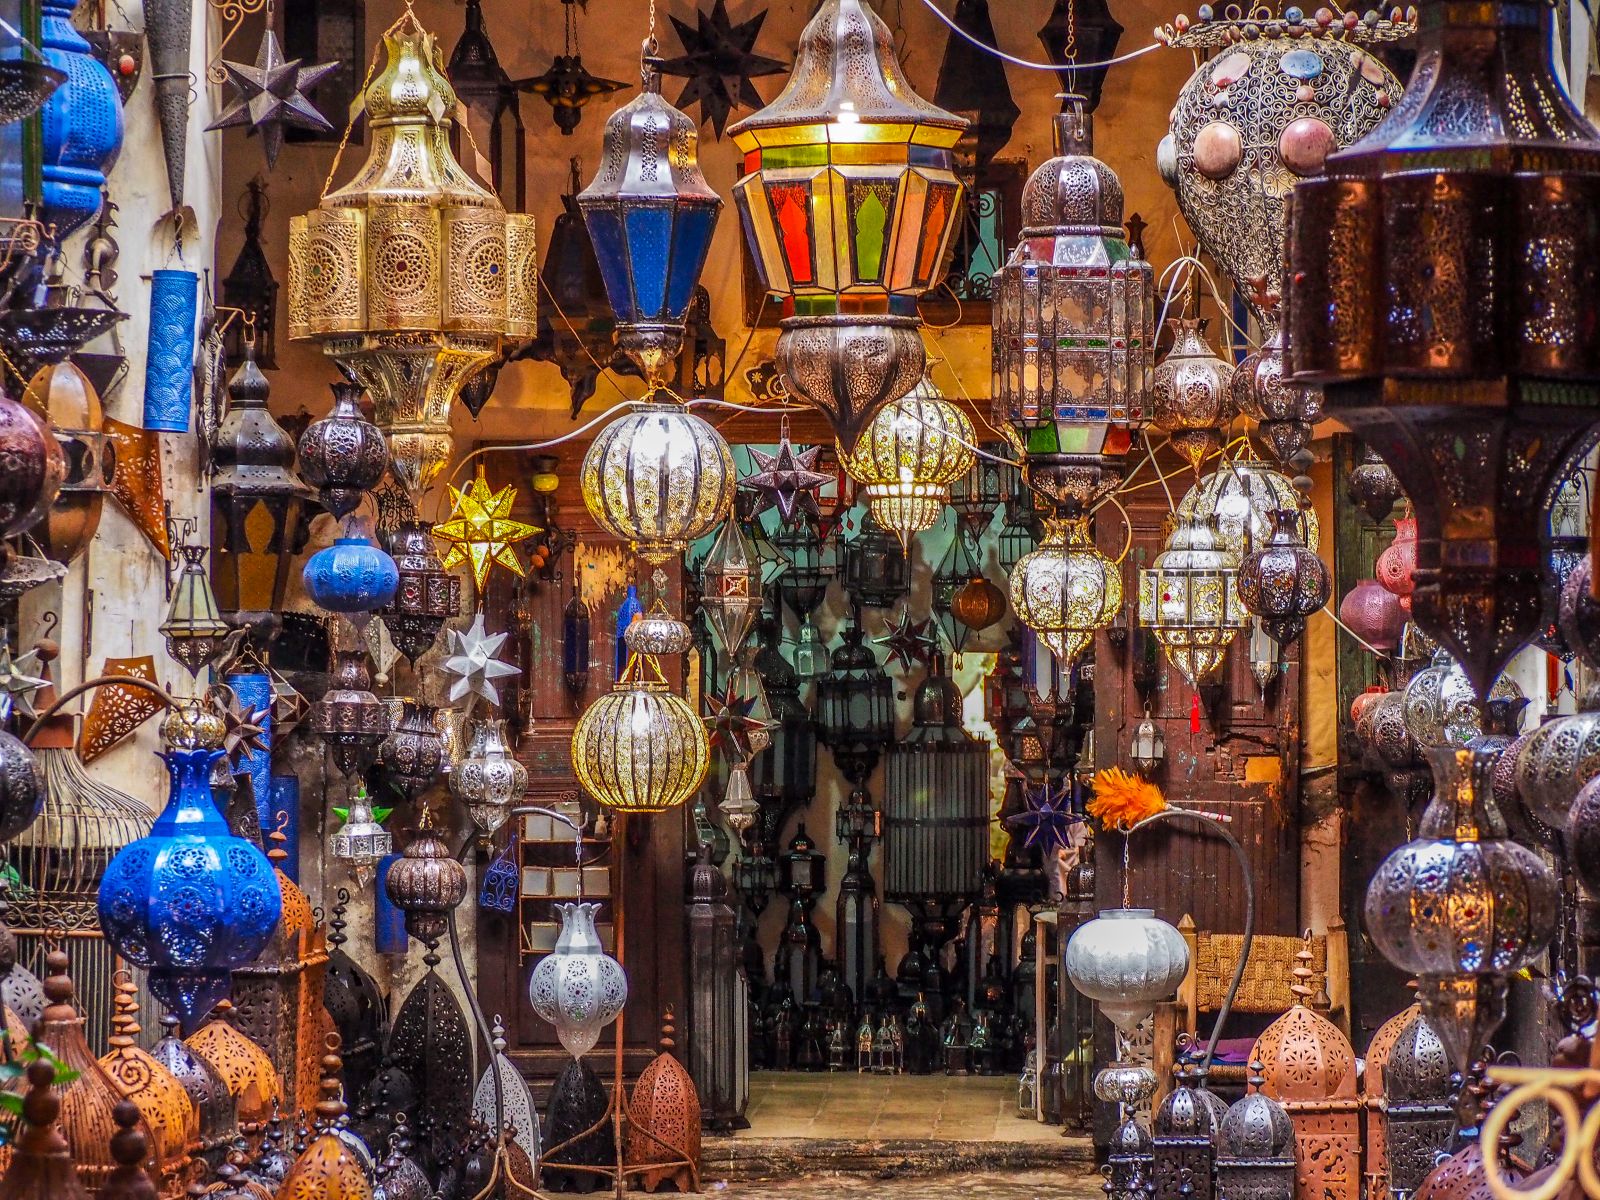 Elaborate lanterns on display in the Marrakech souq in Morocco